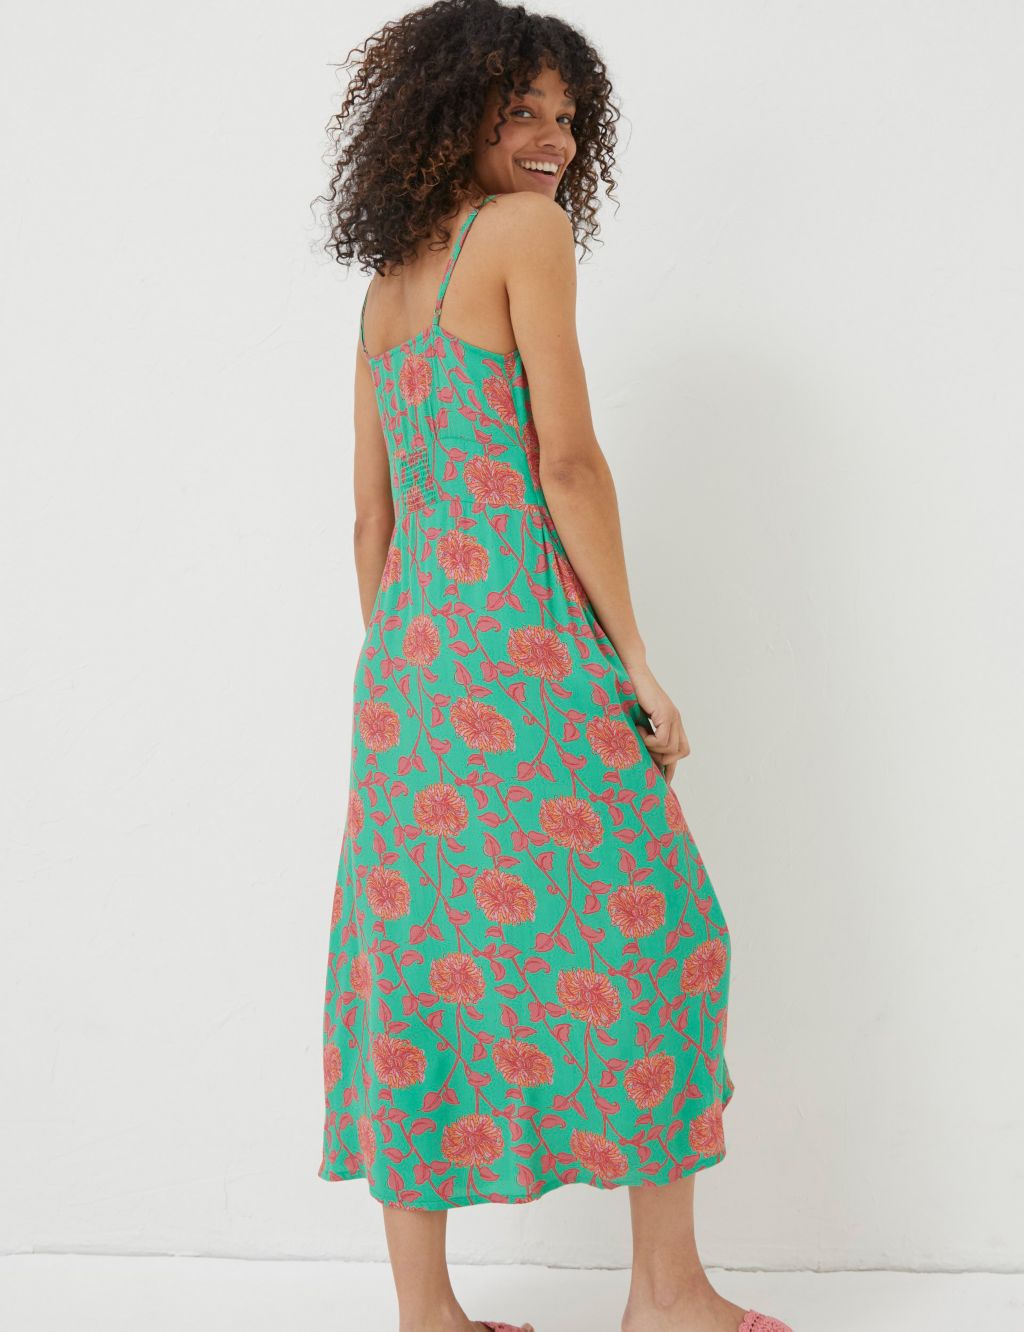 Floral Tie Neck Midi Waisted Dress image 2